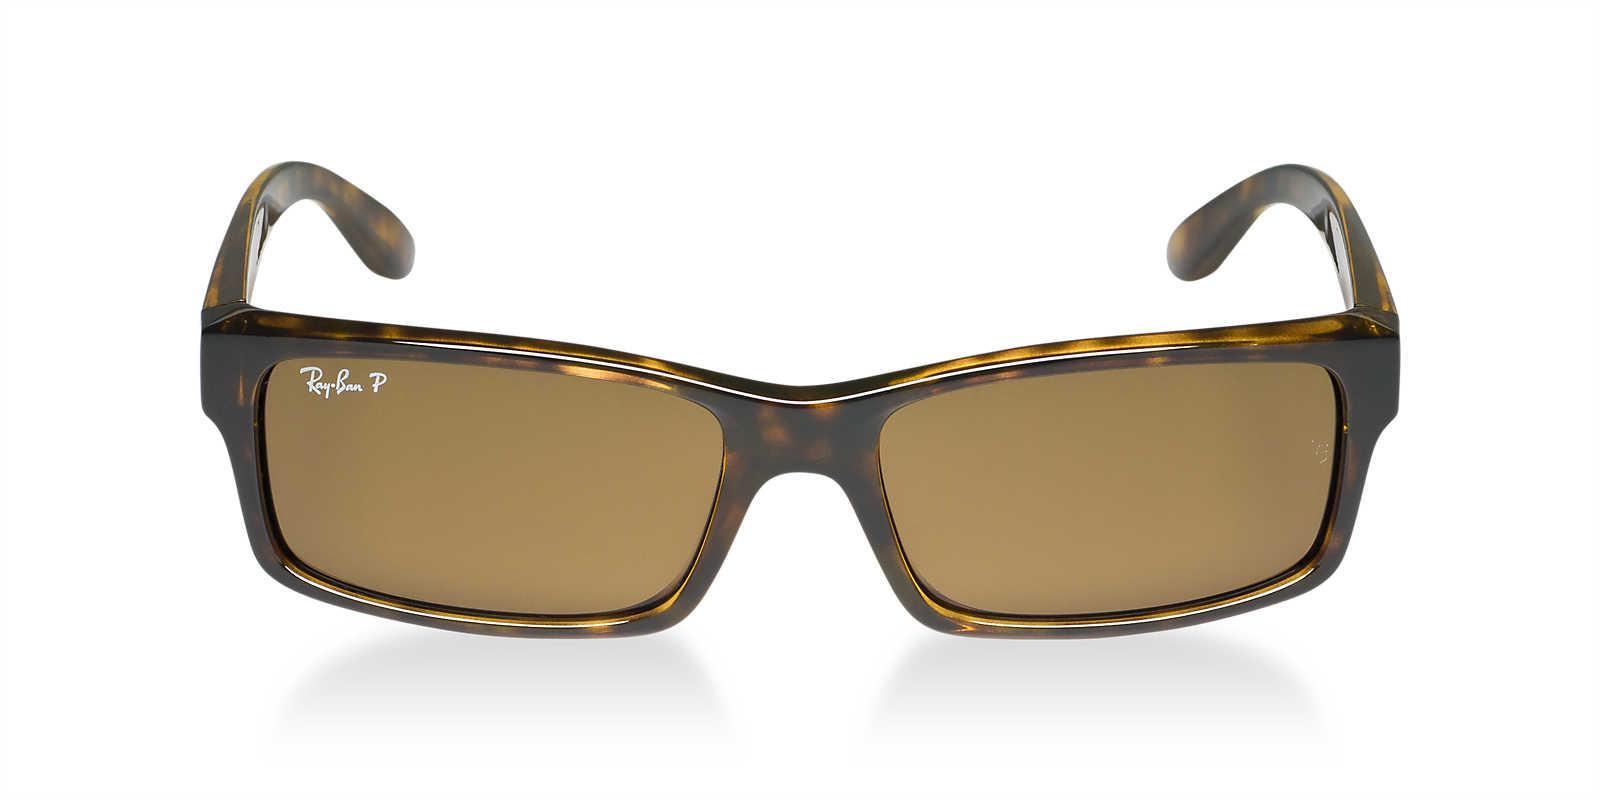 Ray-Ban Rb4151 in Tortoise / Brown 